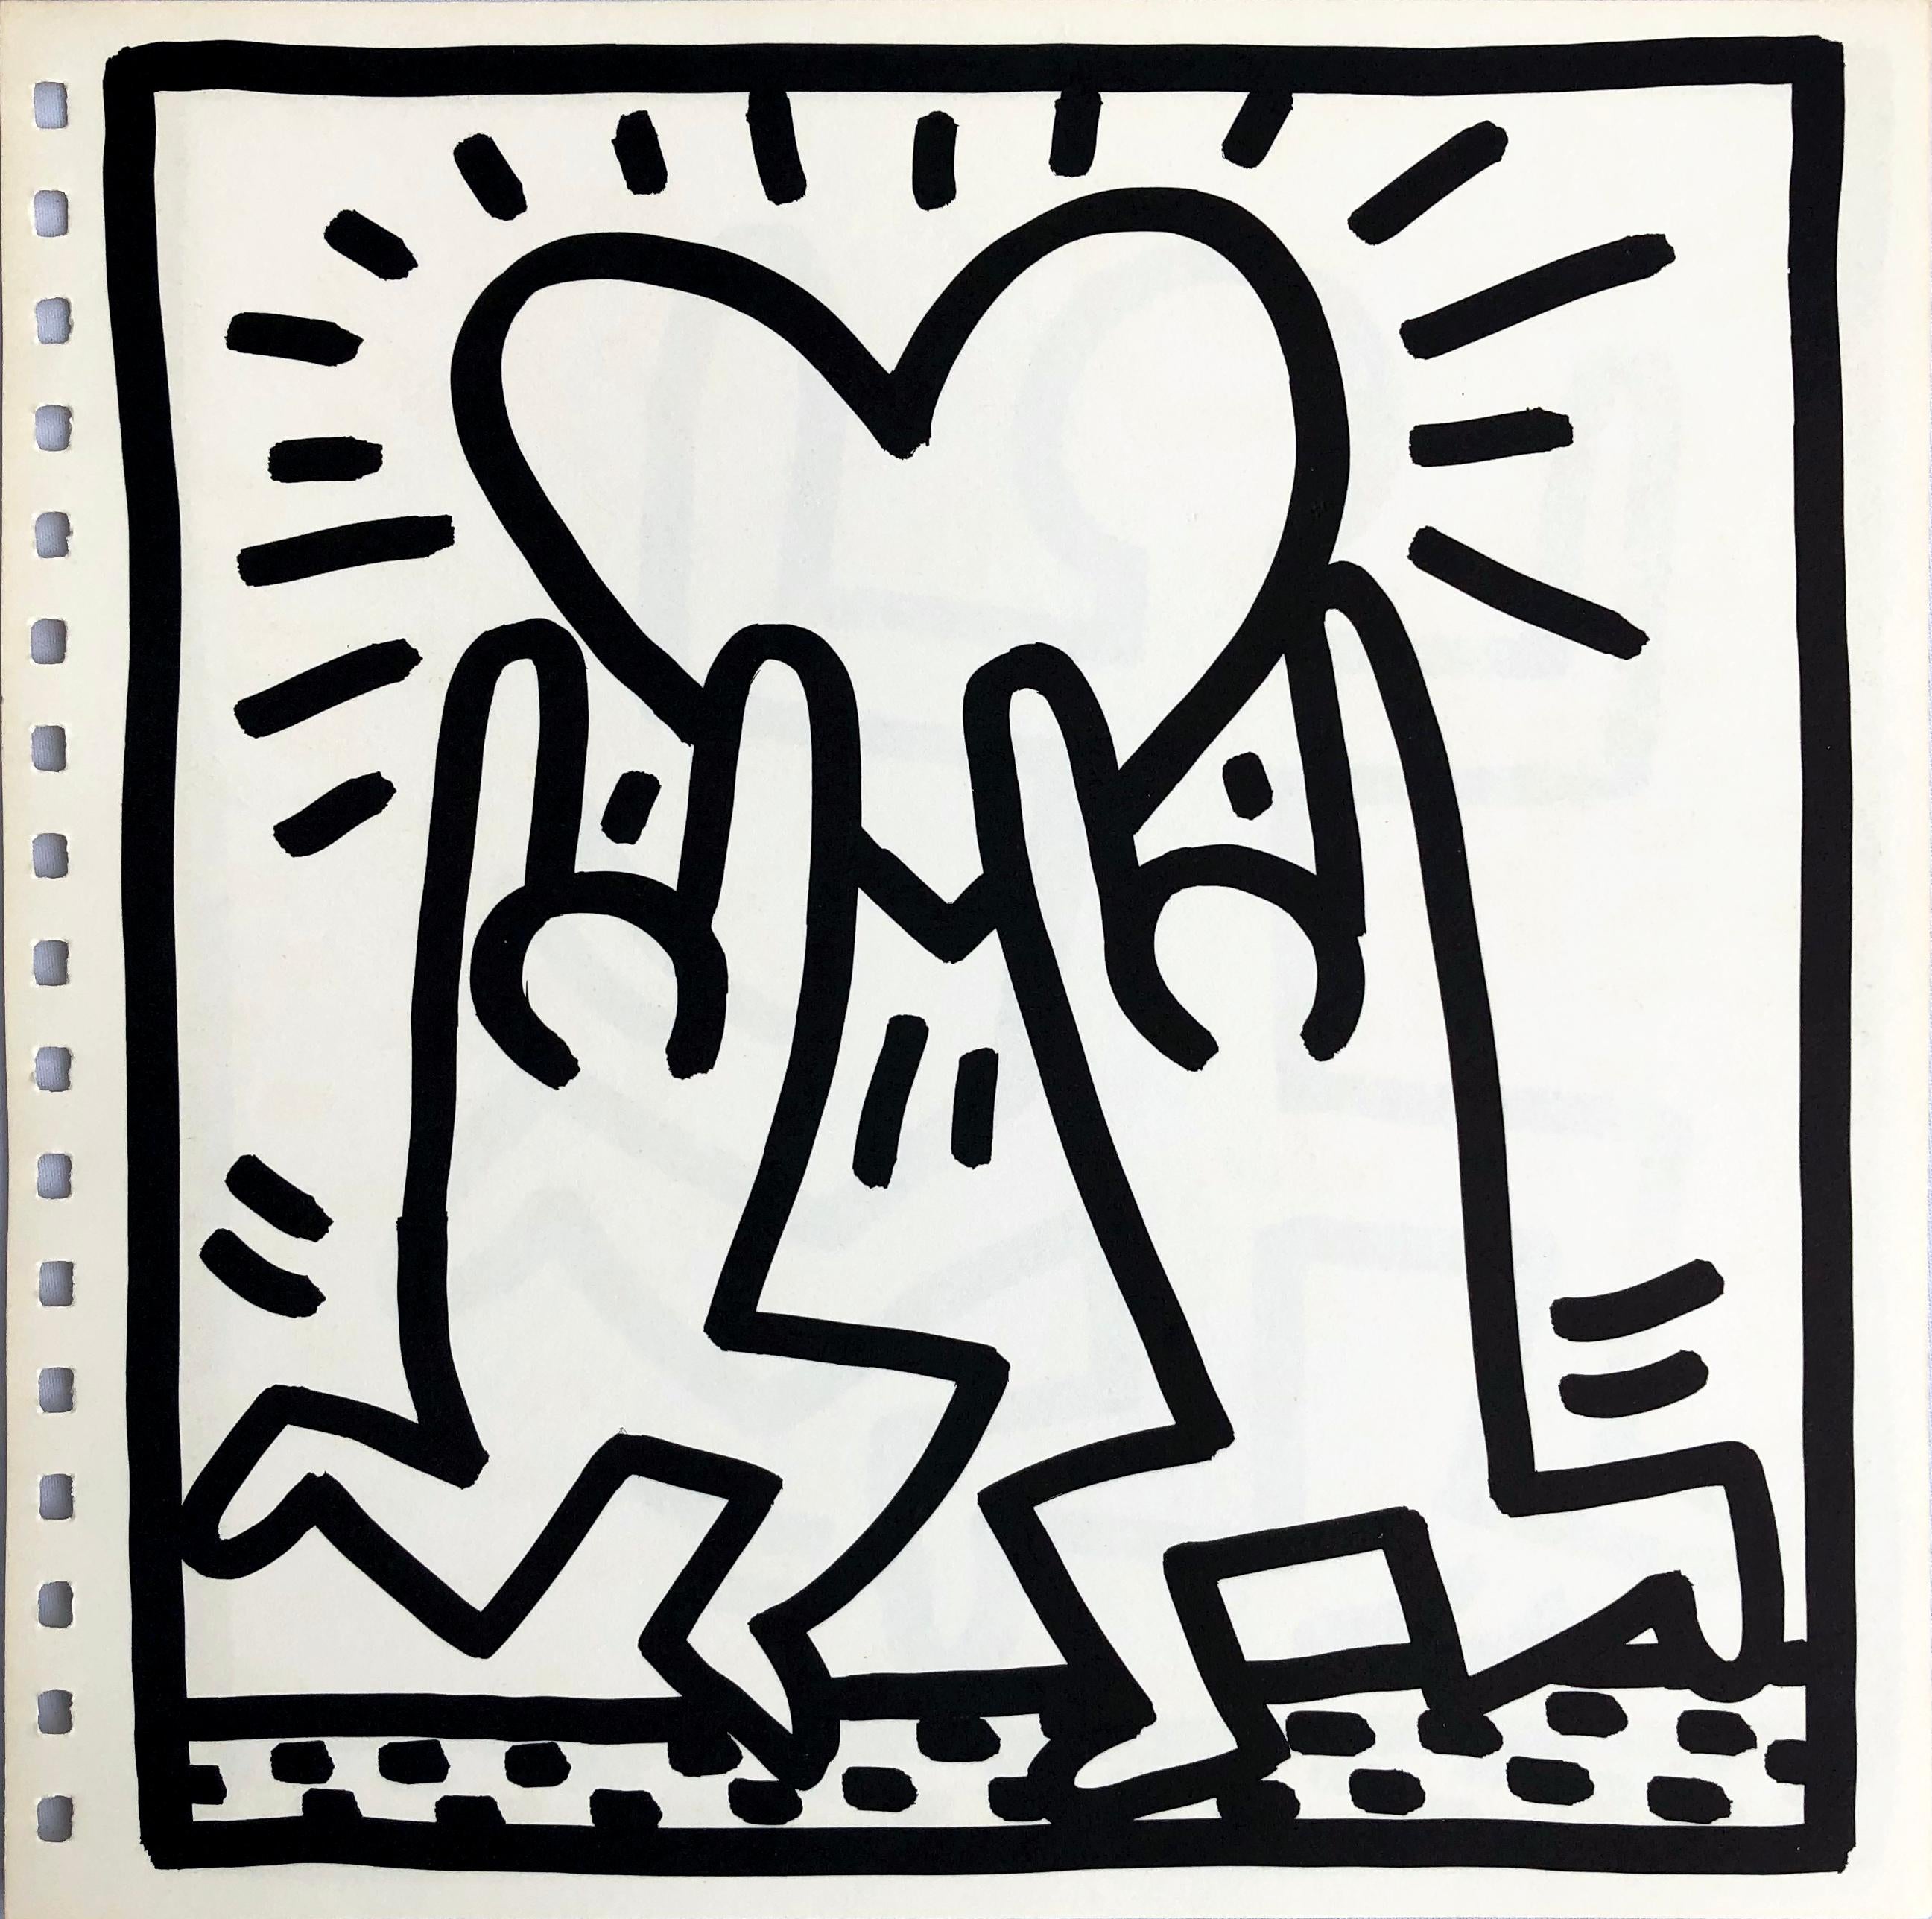 Keith Haring (untitled) Heart lithograph 1982 (Keith Haring heart) - Pop Art Print by (after) Keith Haring